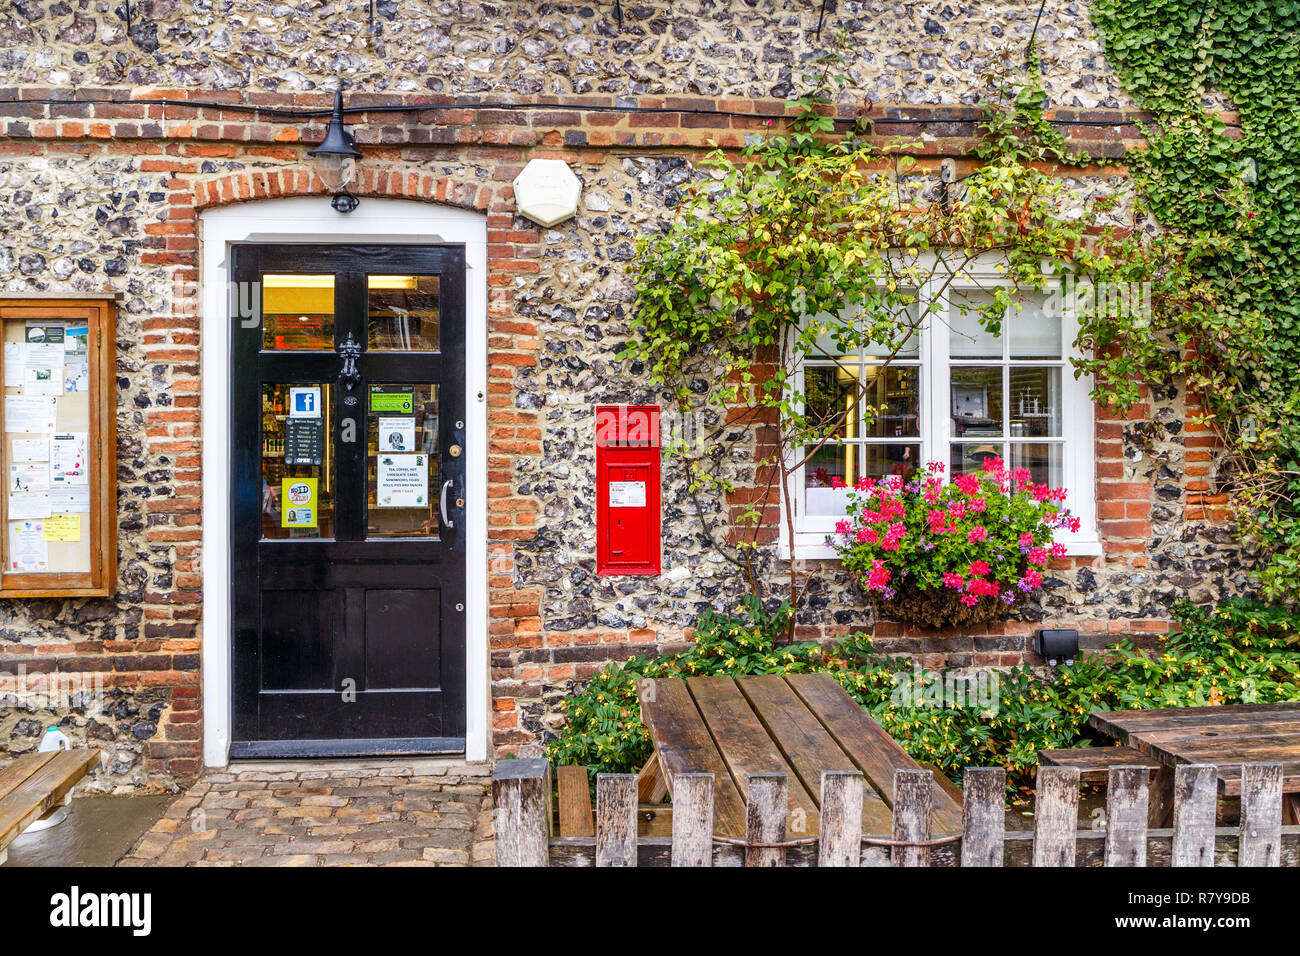 Hambleden, England - 13th August 2015: The old post office and village store. The building is a brick and flint cottage. Stock Photo